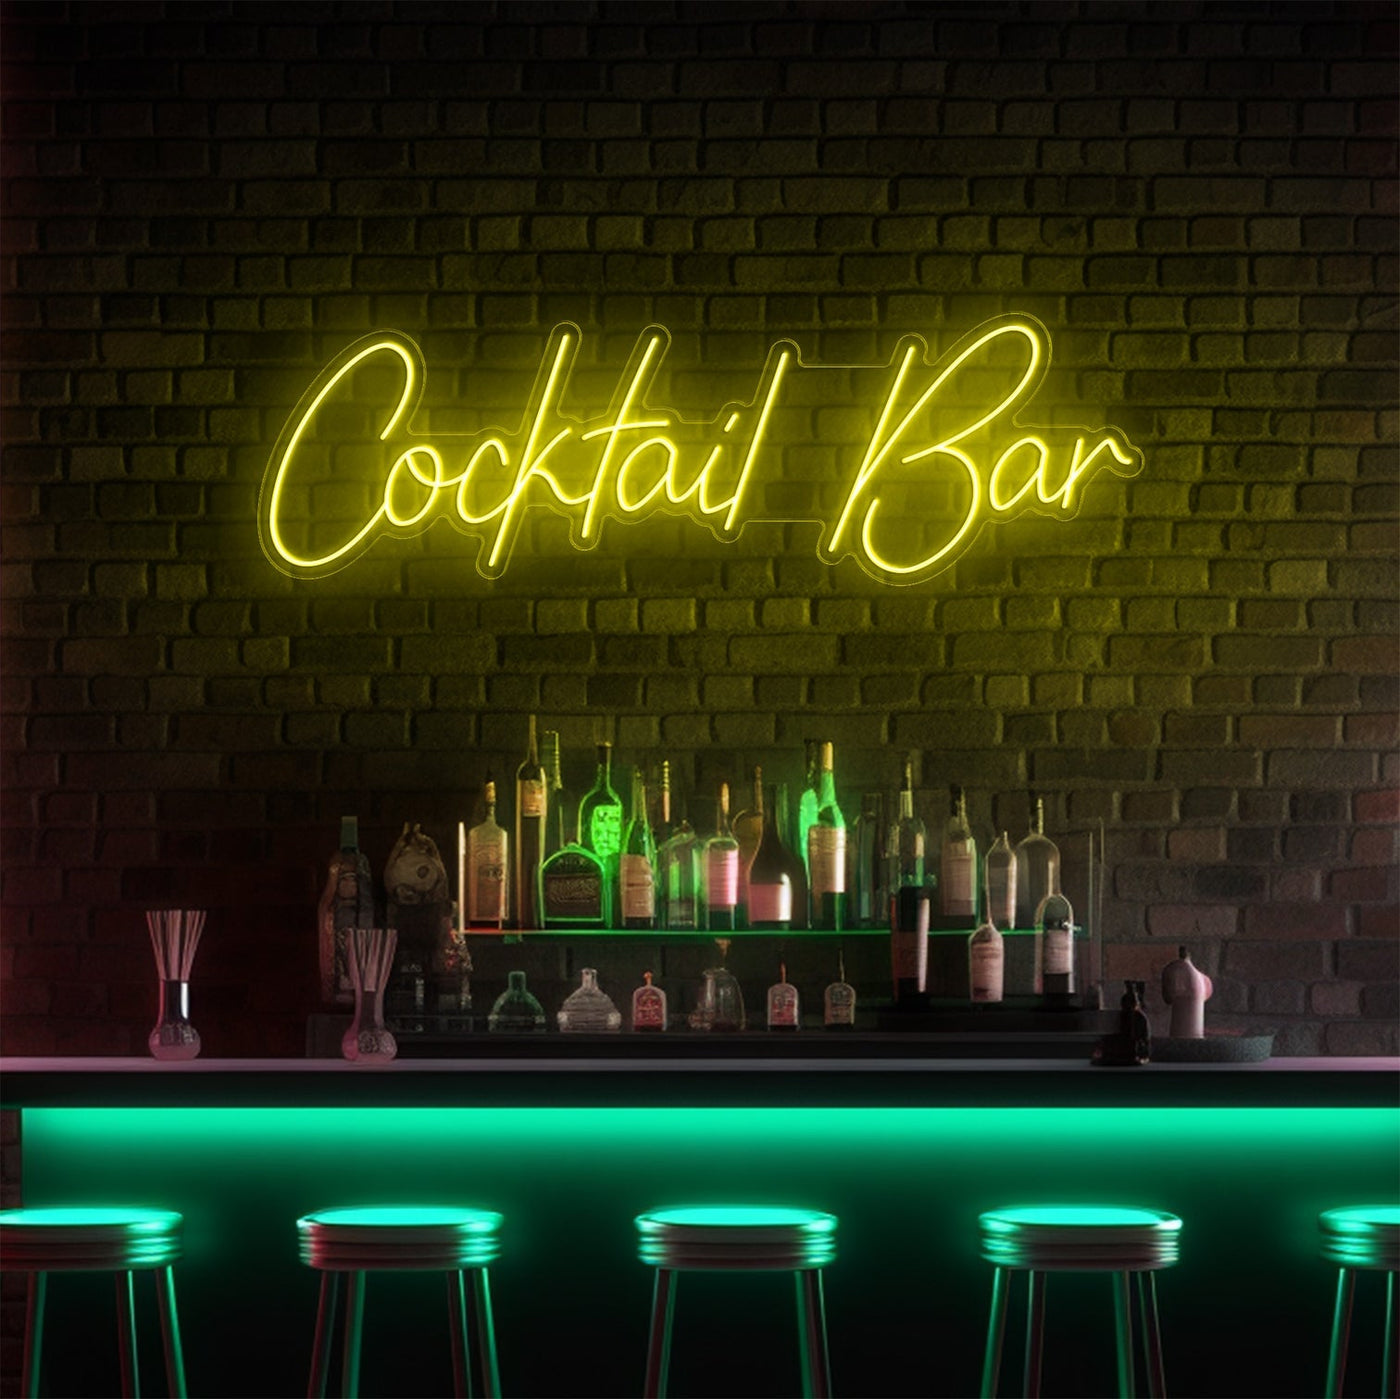 Cocktail Bar LED Neon Sign - 40 InchTurquoise